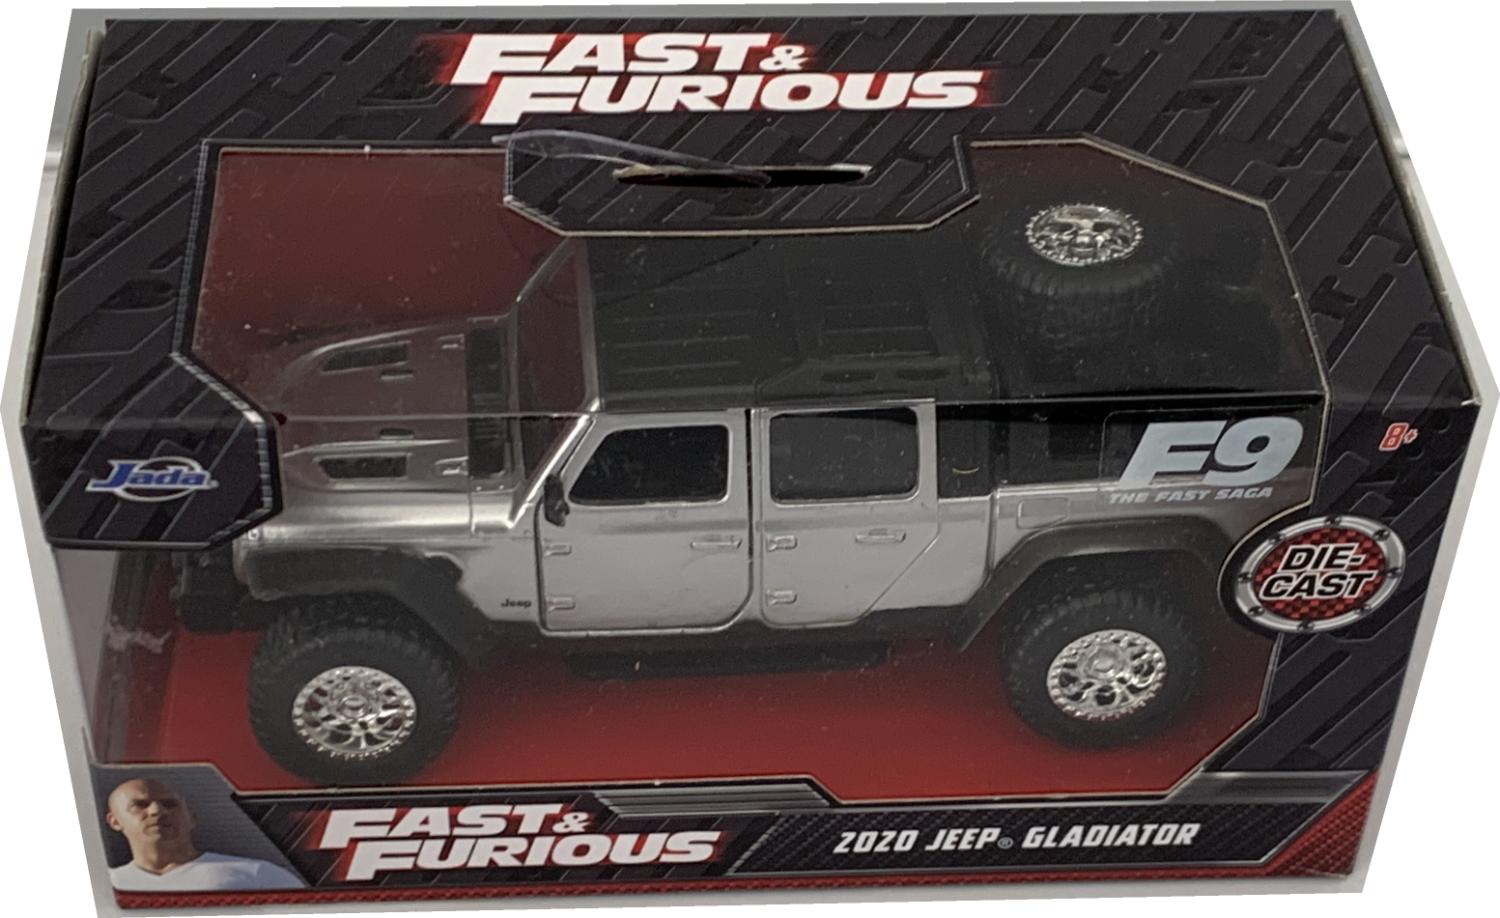 An excellent reproduction of the  F&F9 Jeep Gladiator with high level of detail throughout, all authentically recreated. Model is presented in a window display box in Fast and Furious themed boxed packaging.